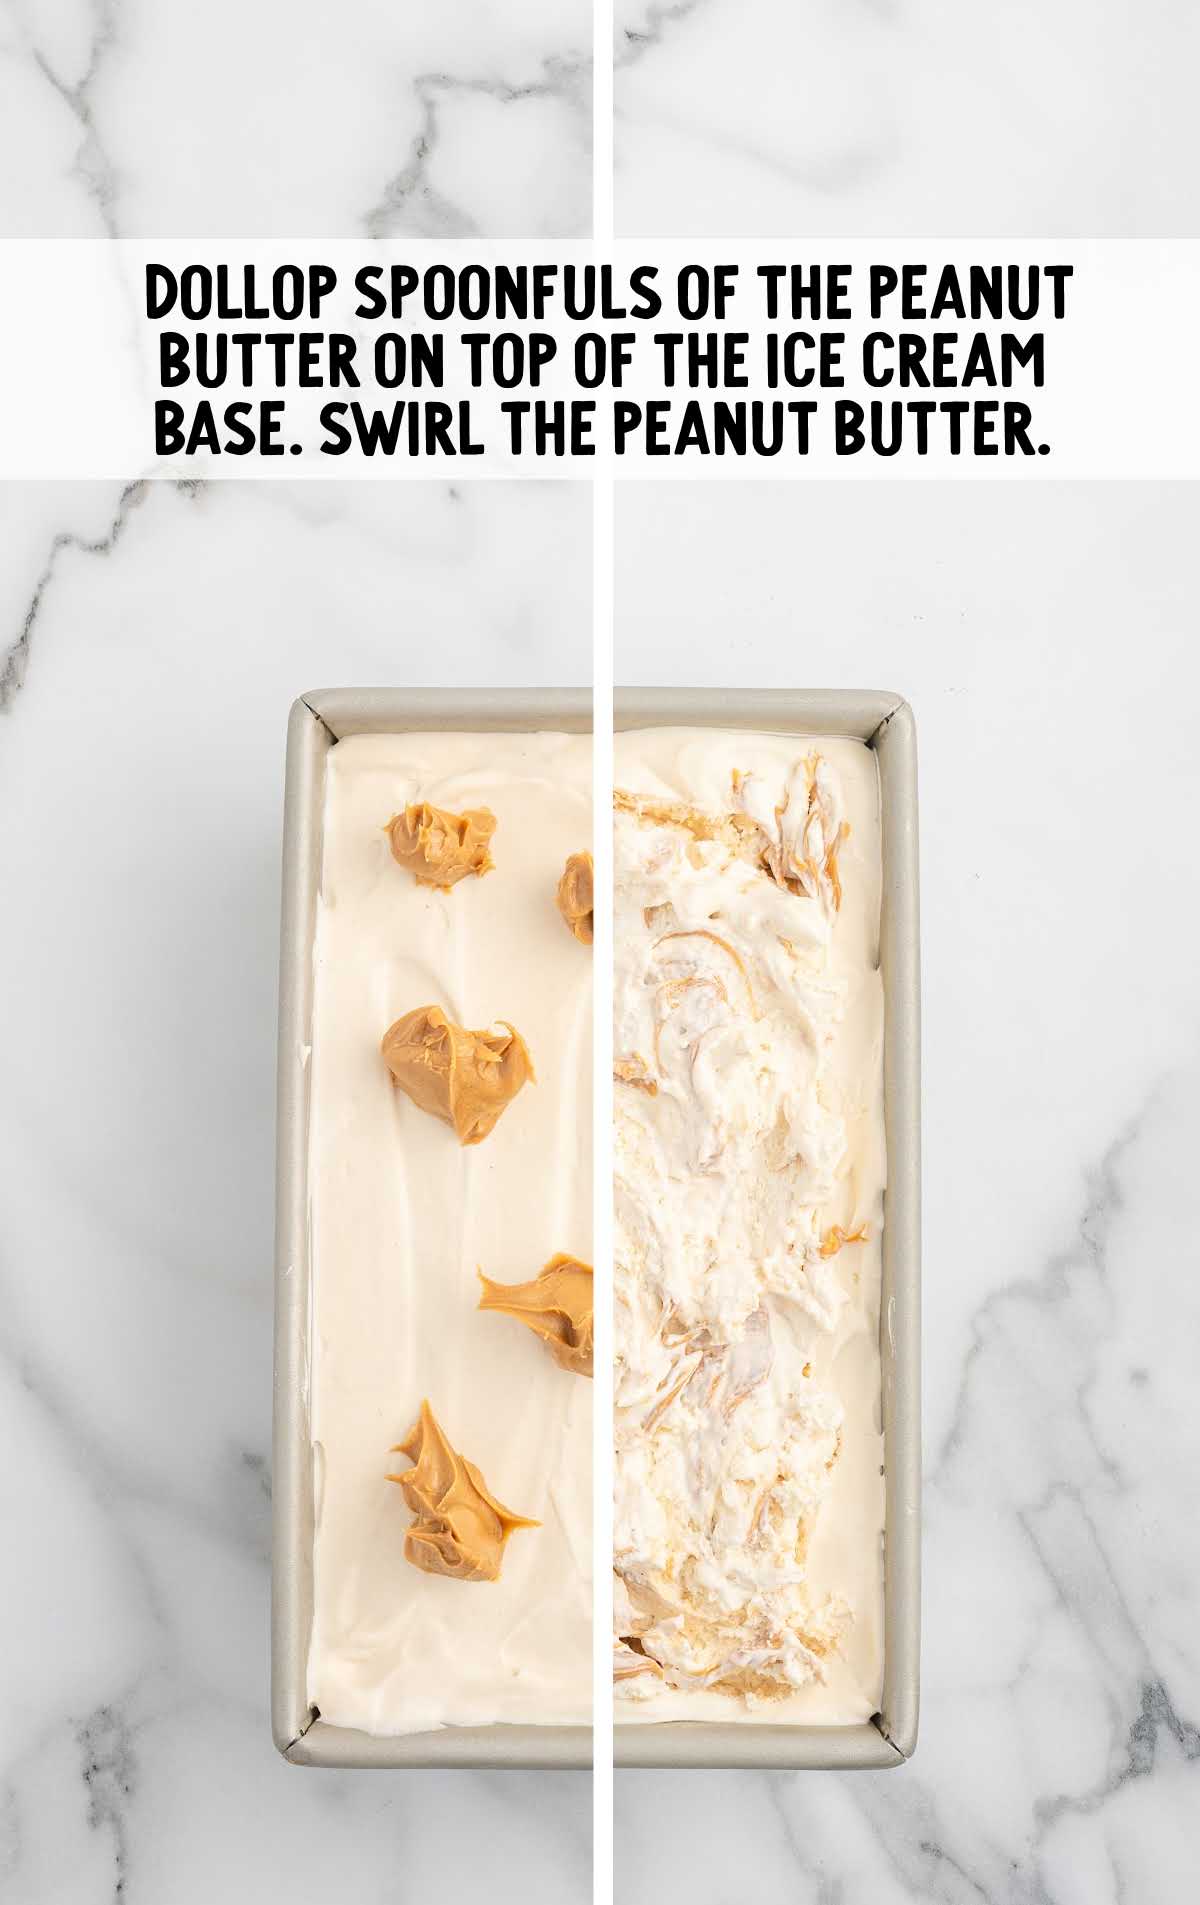 spoonfuls of peanut butter swirled over the ice cream base